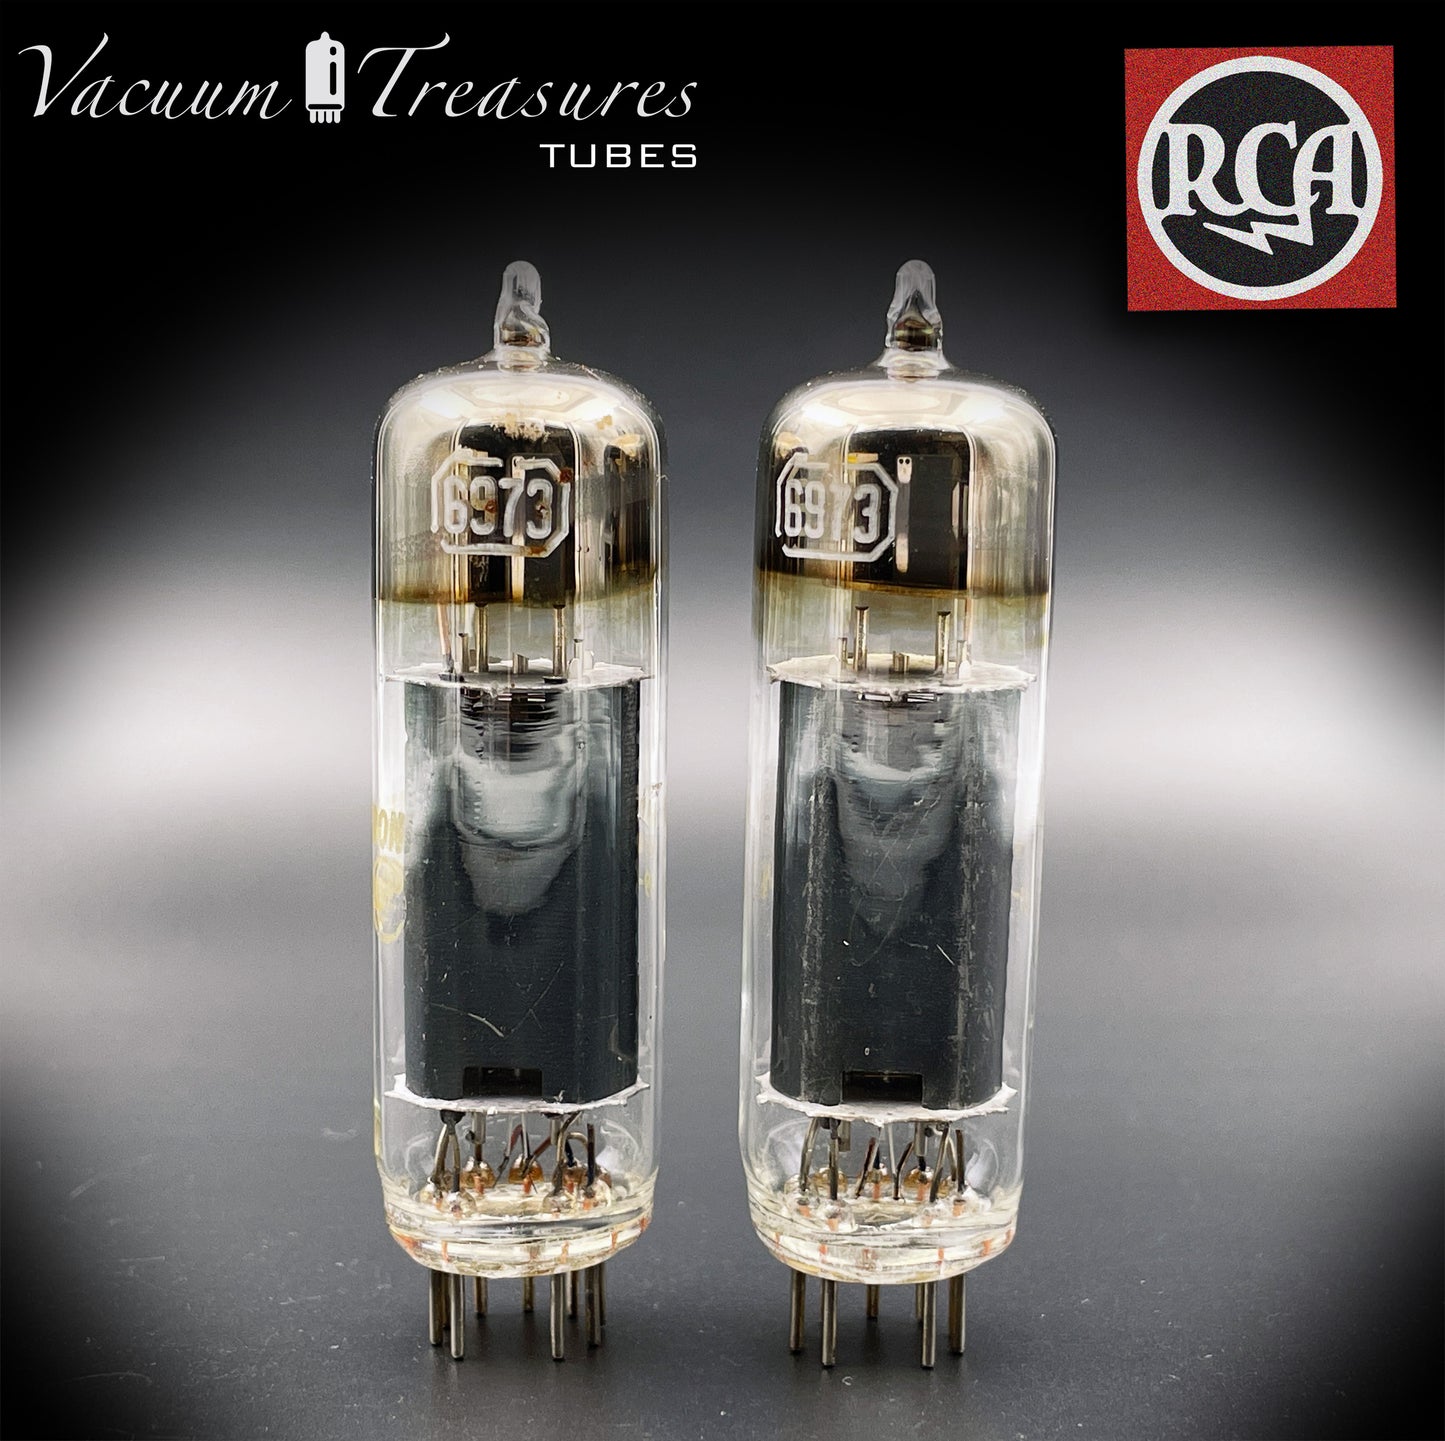 6973 RCA Black Plates Halo Getter Matched Pair Tubes Hergestellt in den USA